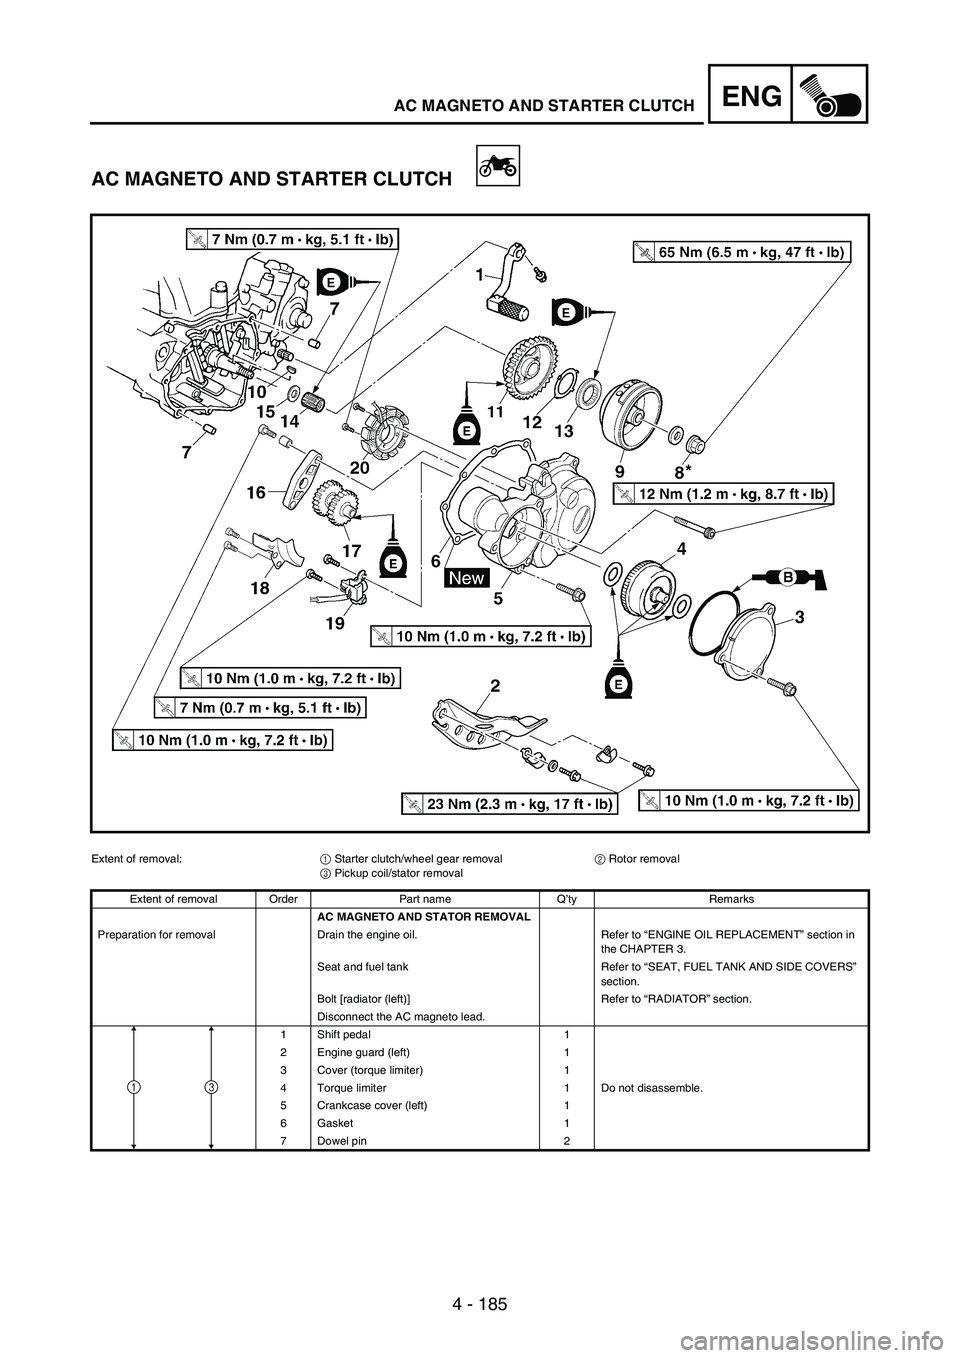 YAMAHA WR 250F 2005  Manuale duso (in Italian) 4 - 185
ENGAC MAGNETO AND STARTER CLUTCH
AC MAGNETO AND STARTER CLUTCH
Extent of removal:
1 Starter clutch/wheel gear removal
2 Rotor removal
3 Pickup coil/stator removal
Extent of removal Order Part 